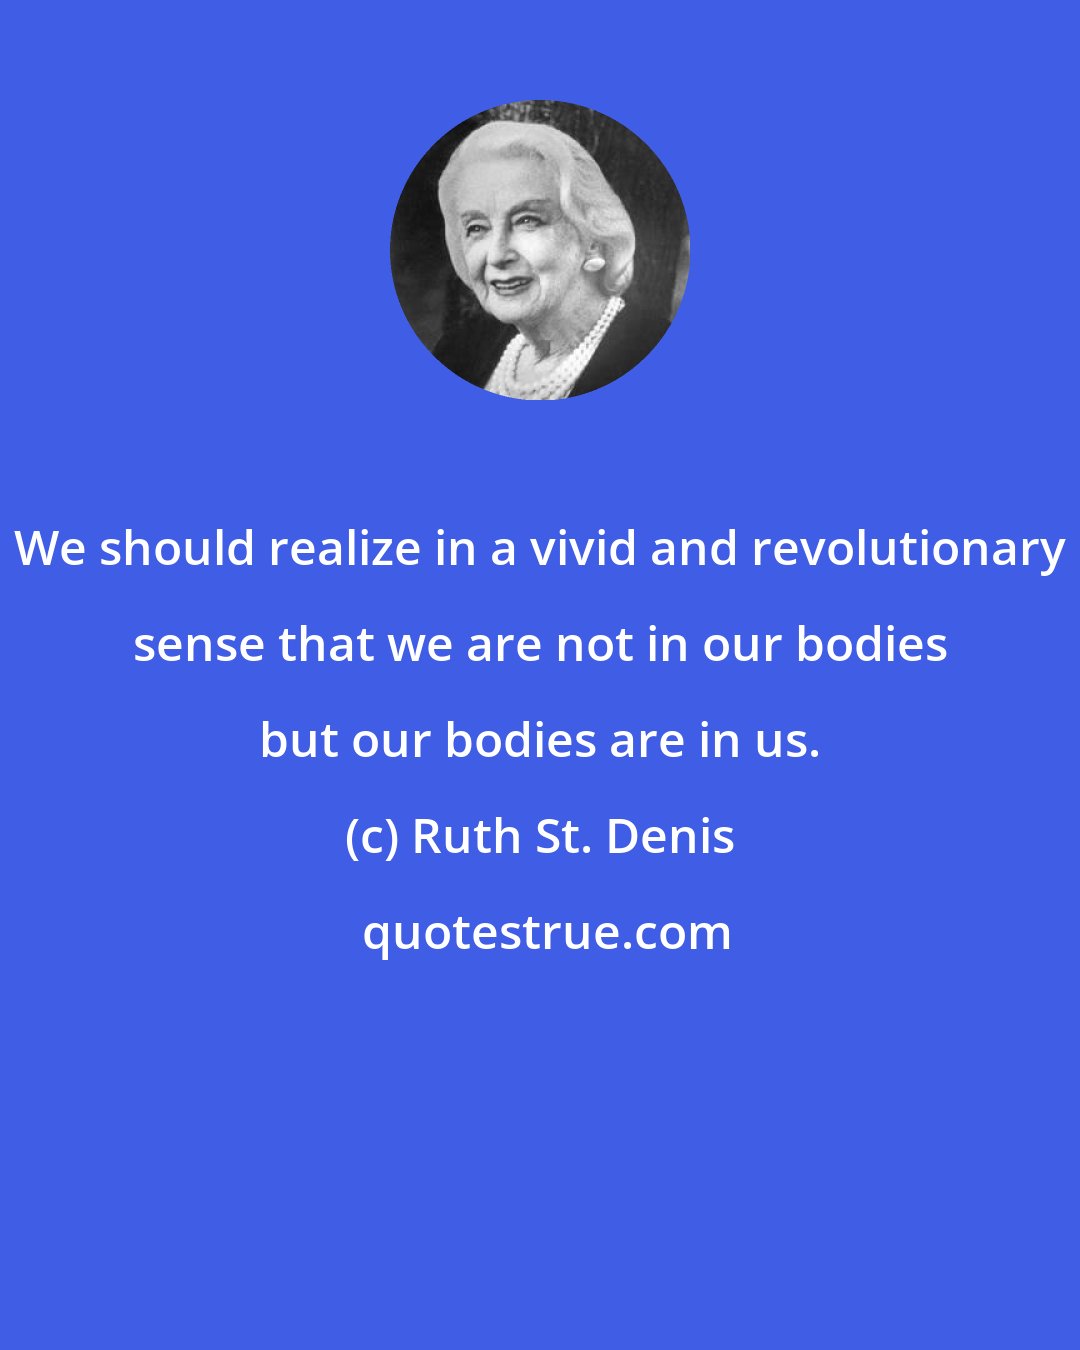 Ruth St. Denis: We should realize in a vivid and revolutionary sense that we are not in our bodies but our bodies are in us.